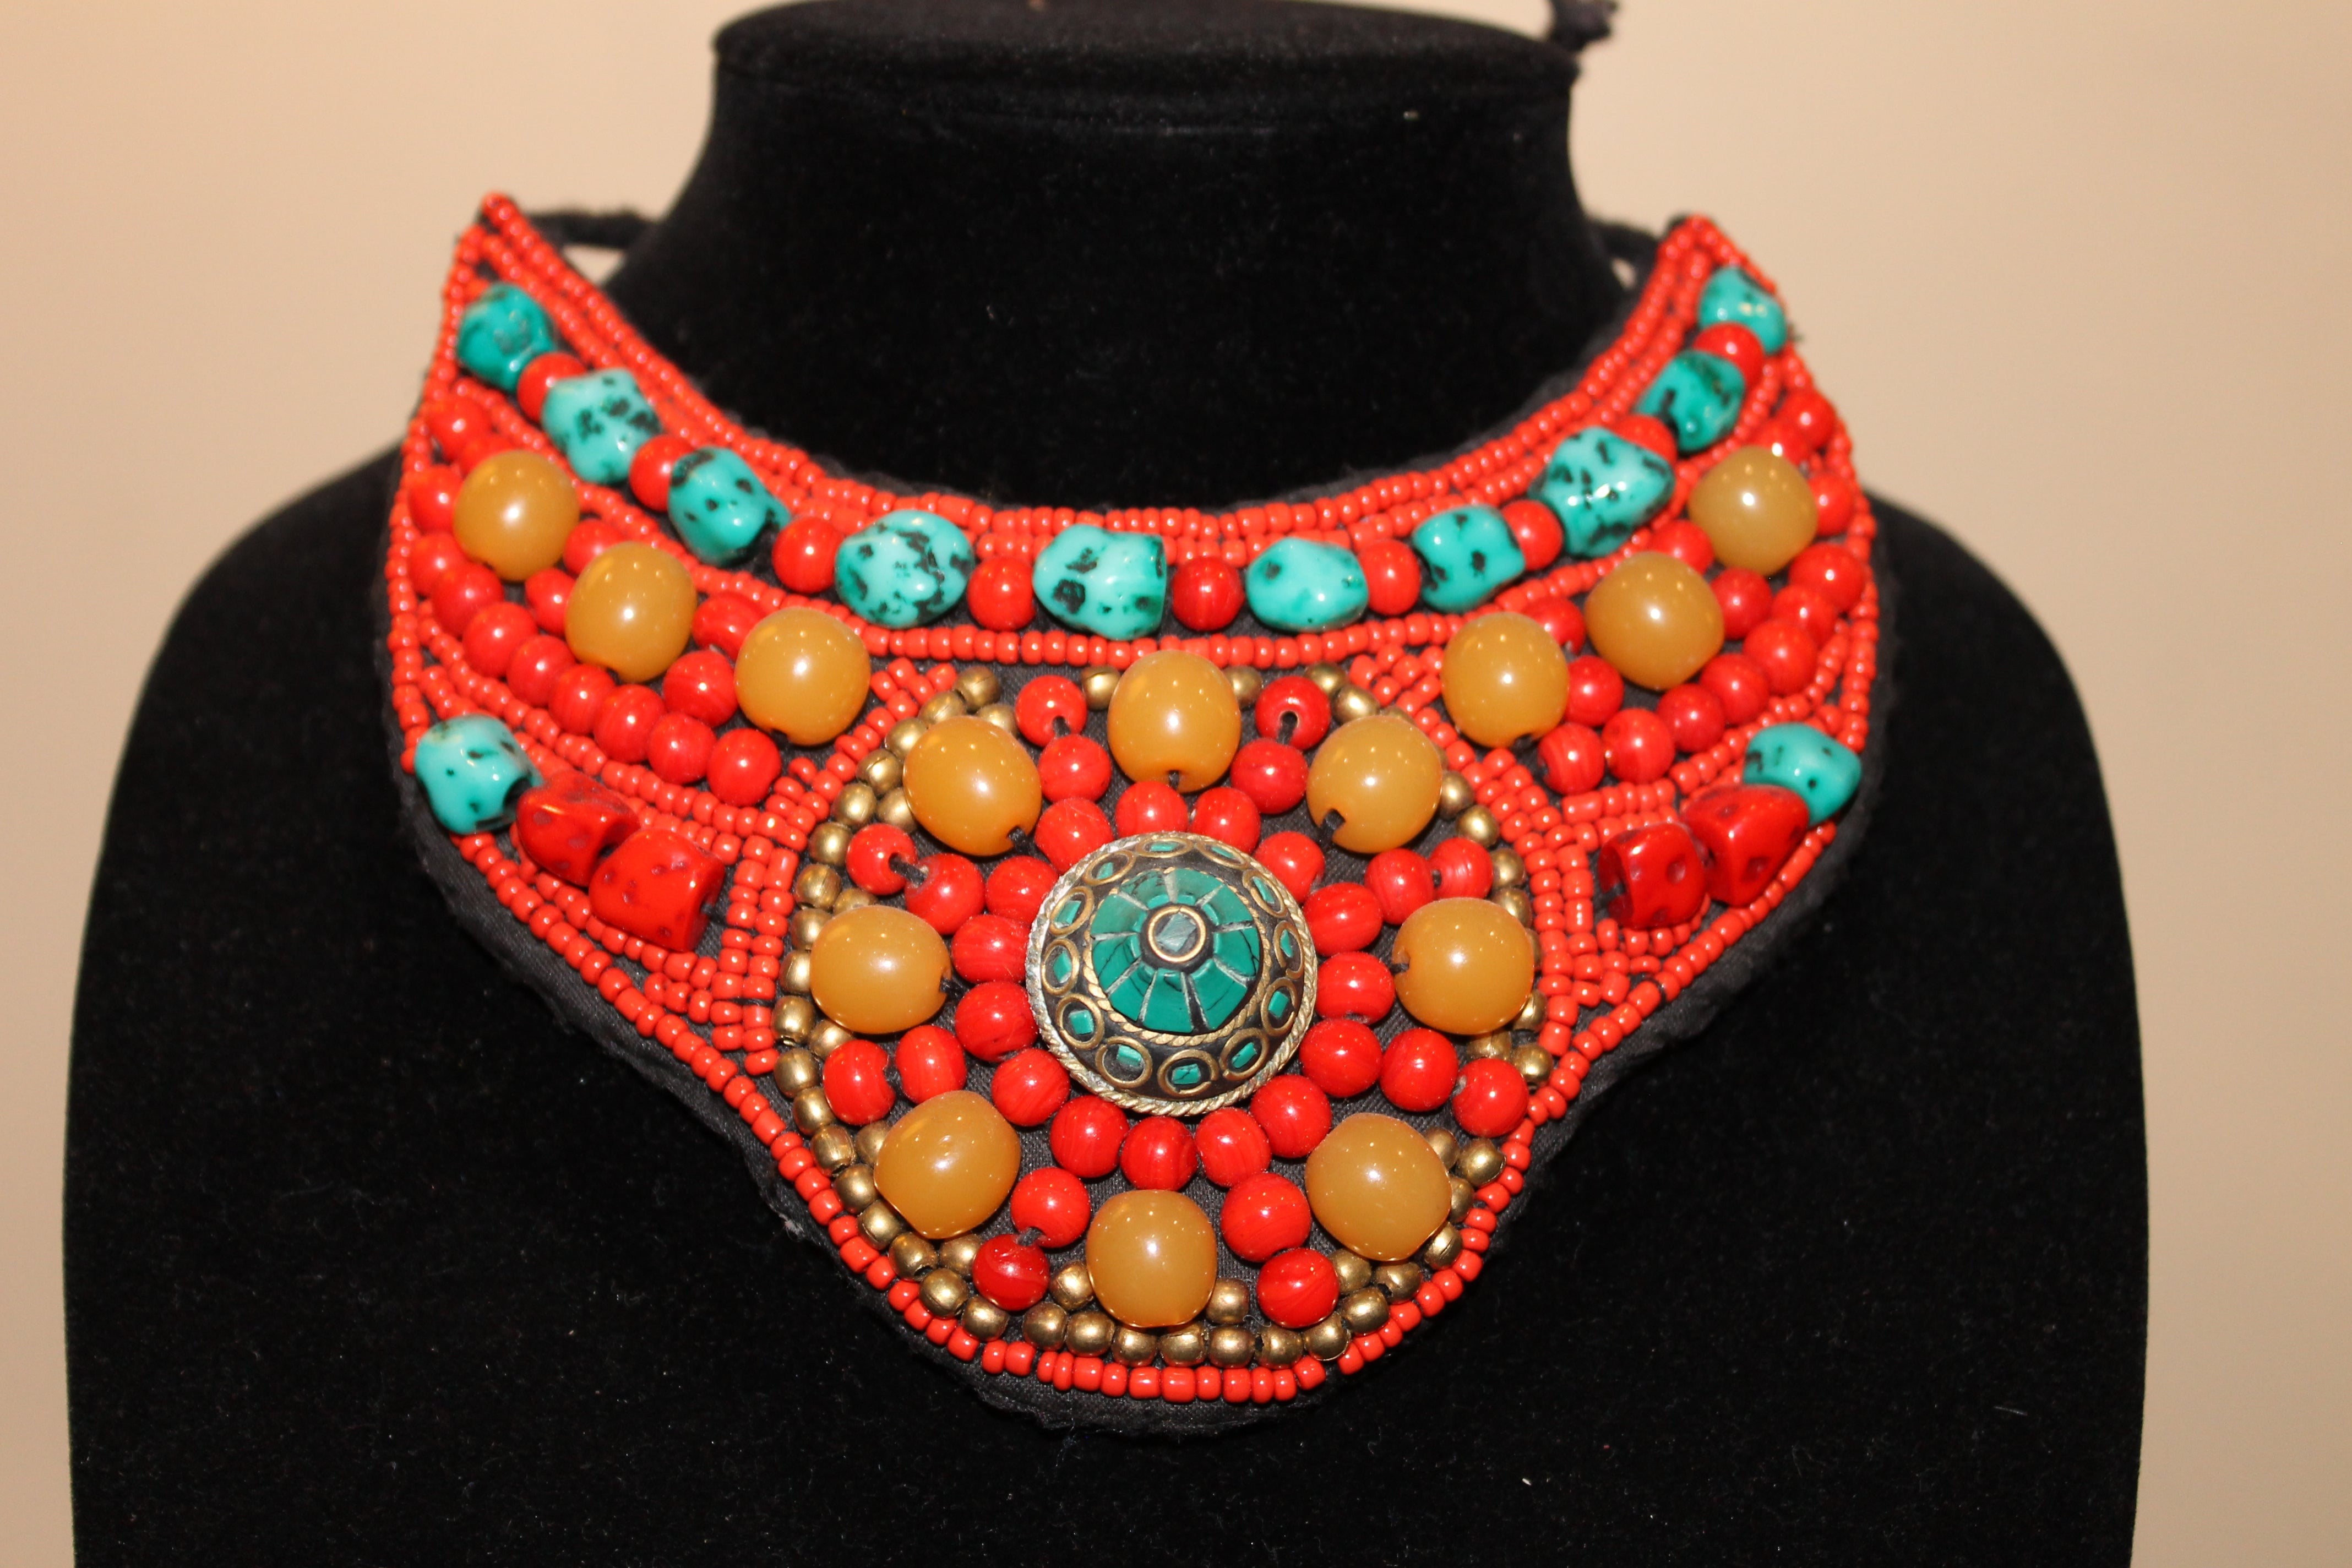 20242182 Turquoise Resin Necklace Multistrand Layered Necklace Relief Bib  Necklace Skin Collar Necklace Statement Necklace